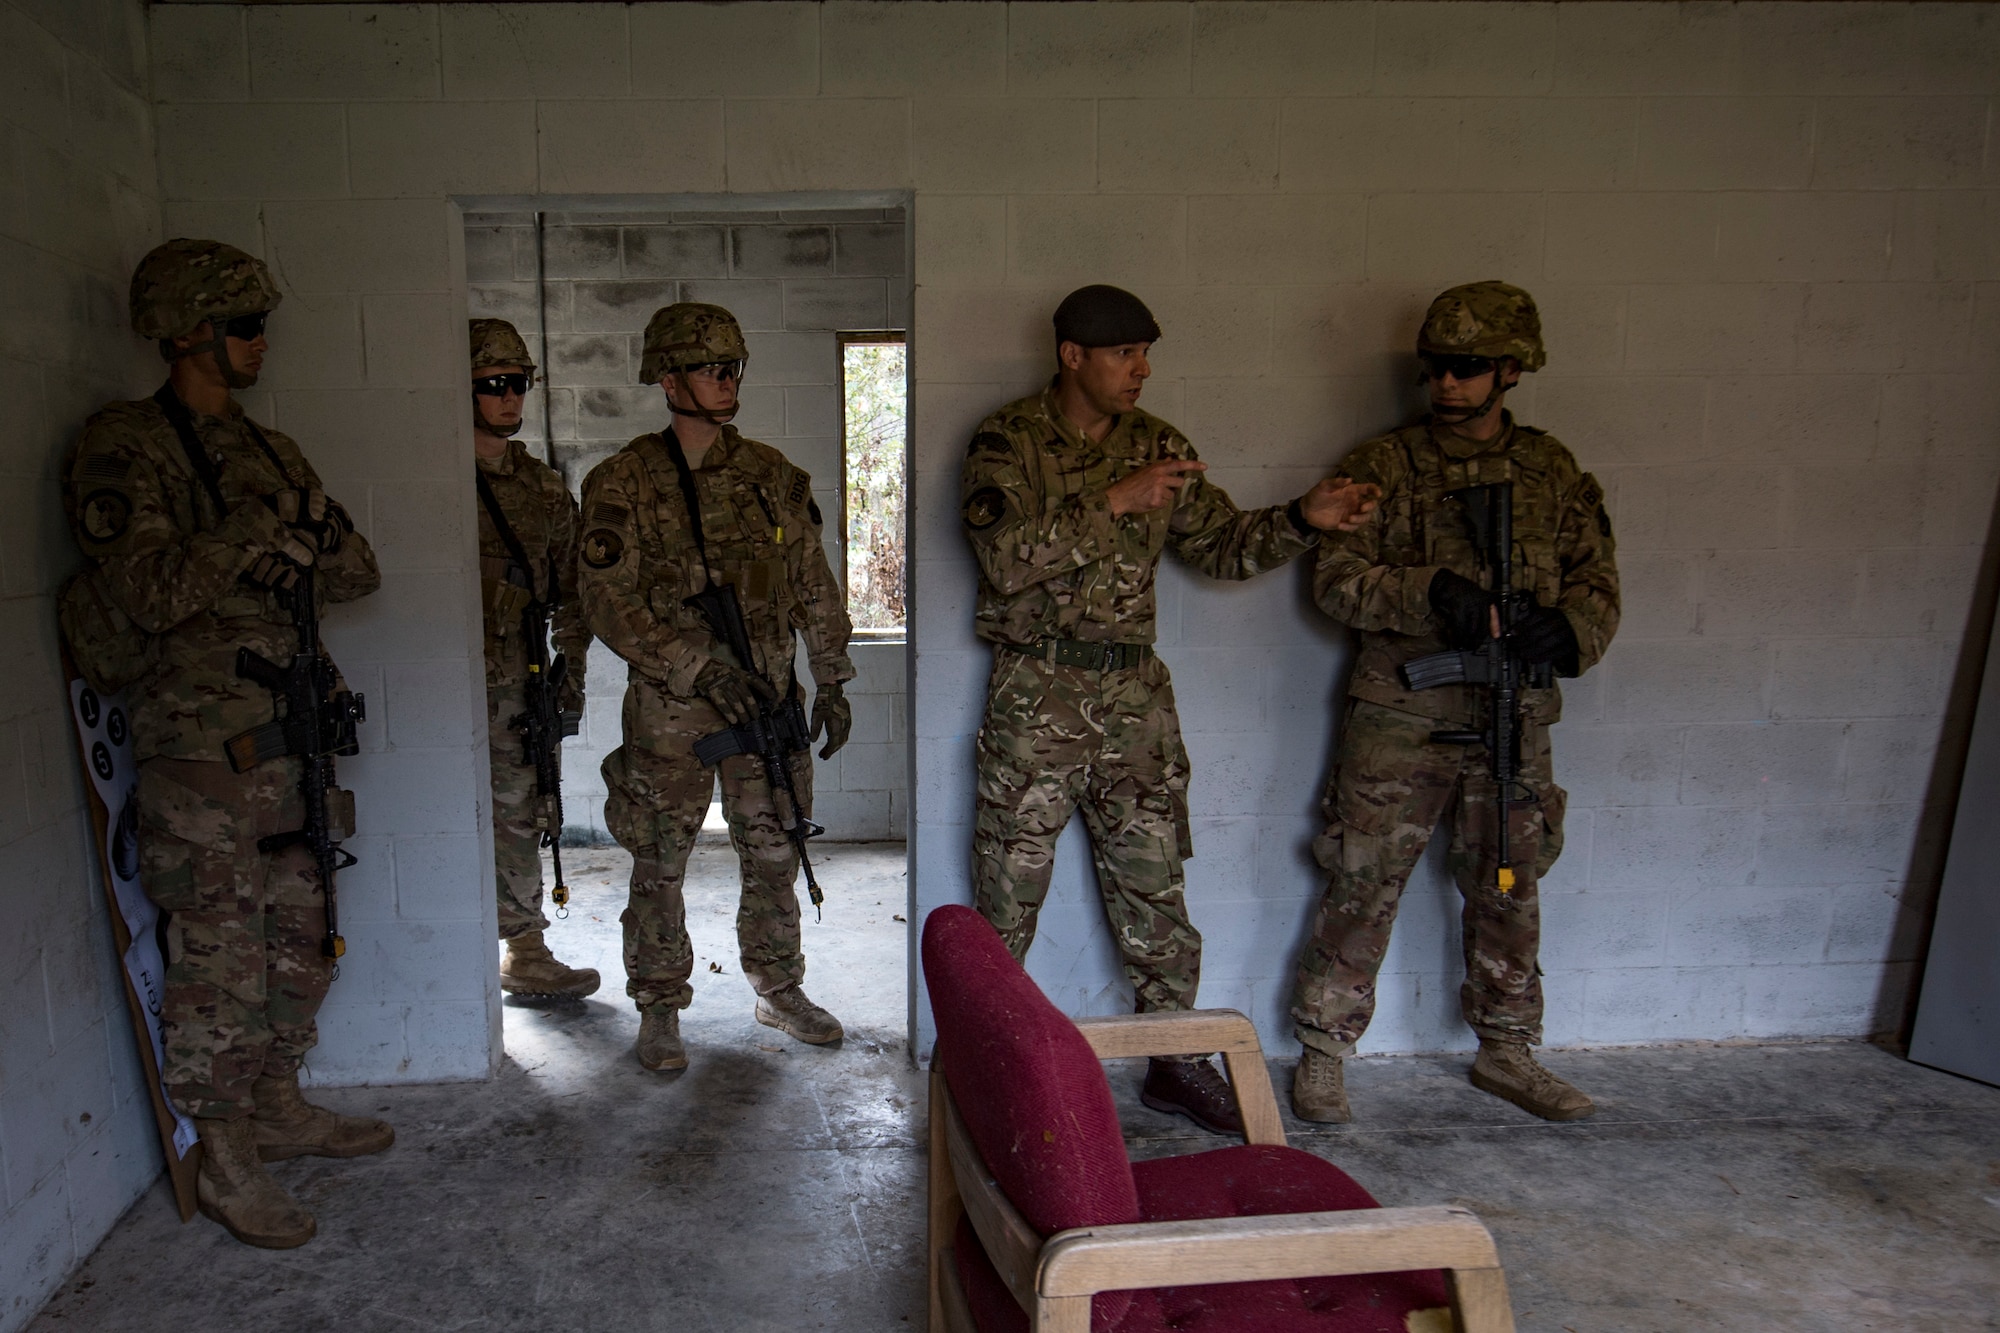 A member of the British Royal Air Force shares tactical points with Airmen from the 824th Base Defense Squadron during close-quarters battle training, Feb. 28, 2018, at Moody Air Force Base, Ga. The 820th Base Defense Group welcomed a member of the British Royal Air Force to embed into multiple training situations to help strengthen combined operations between U.S. and British forces. (U.S. Air Force photo by Senior Airman Daniel Snider)